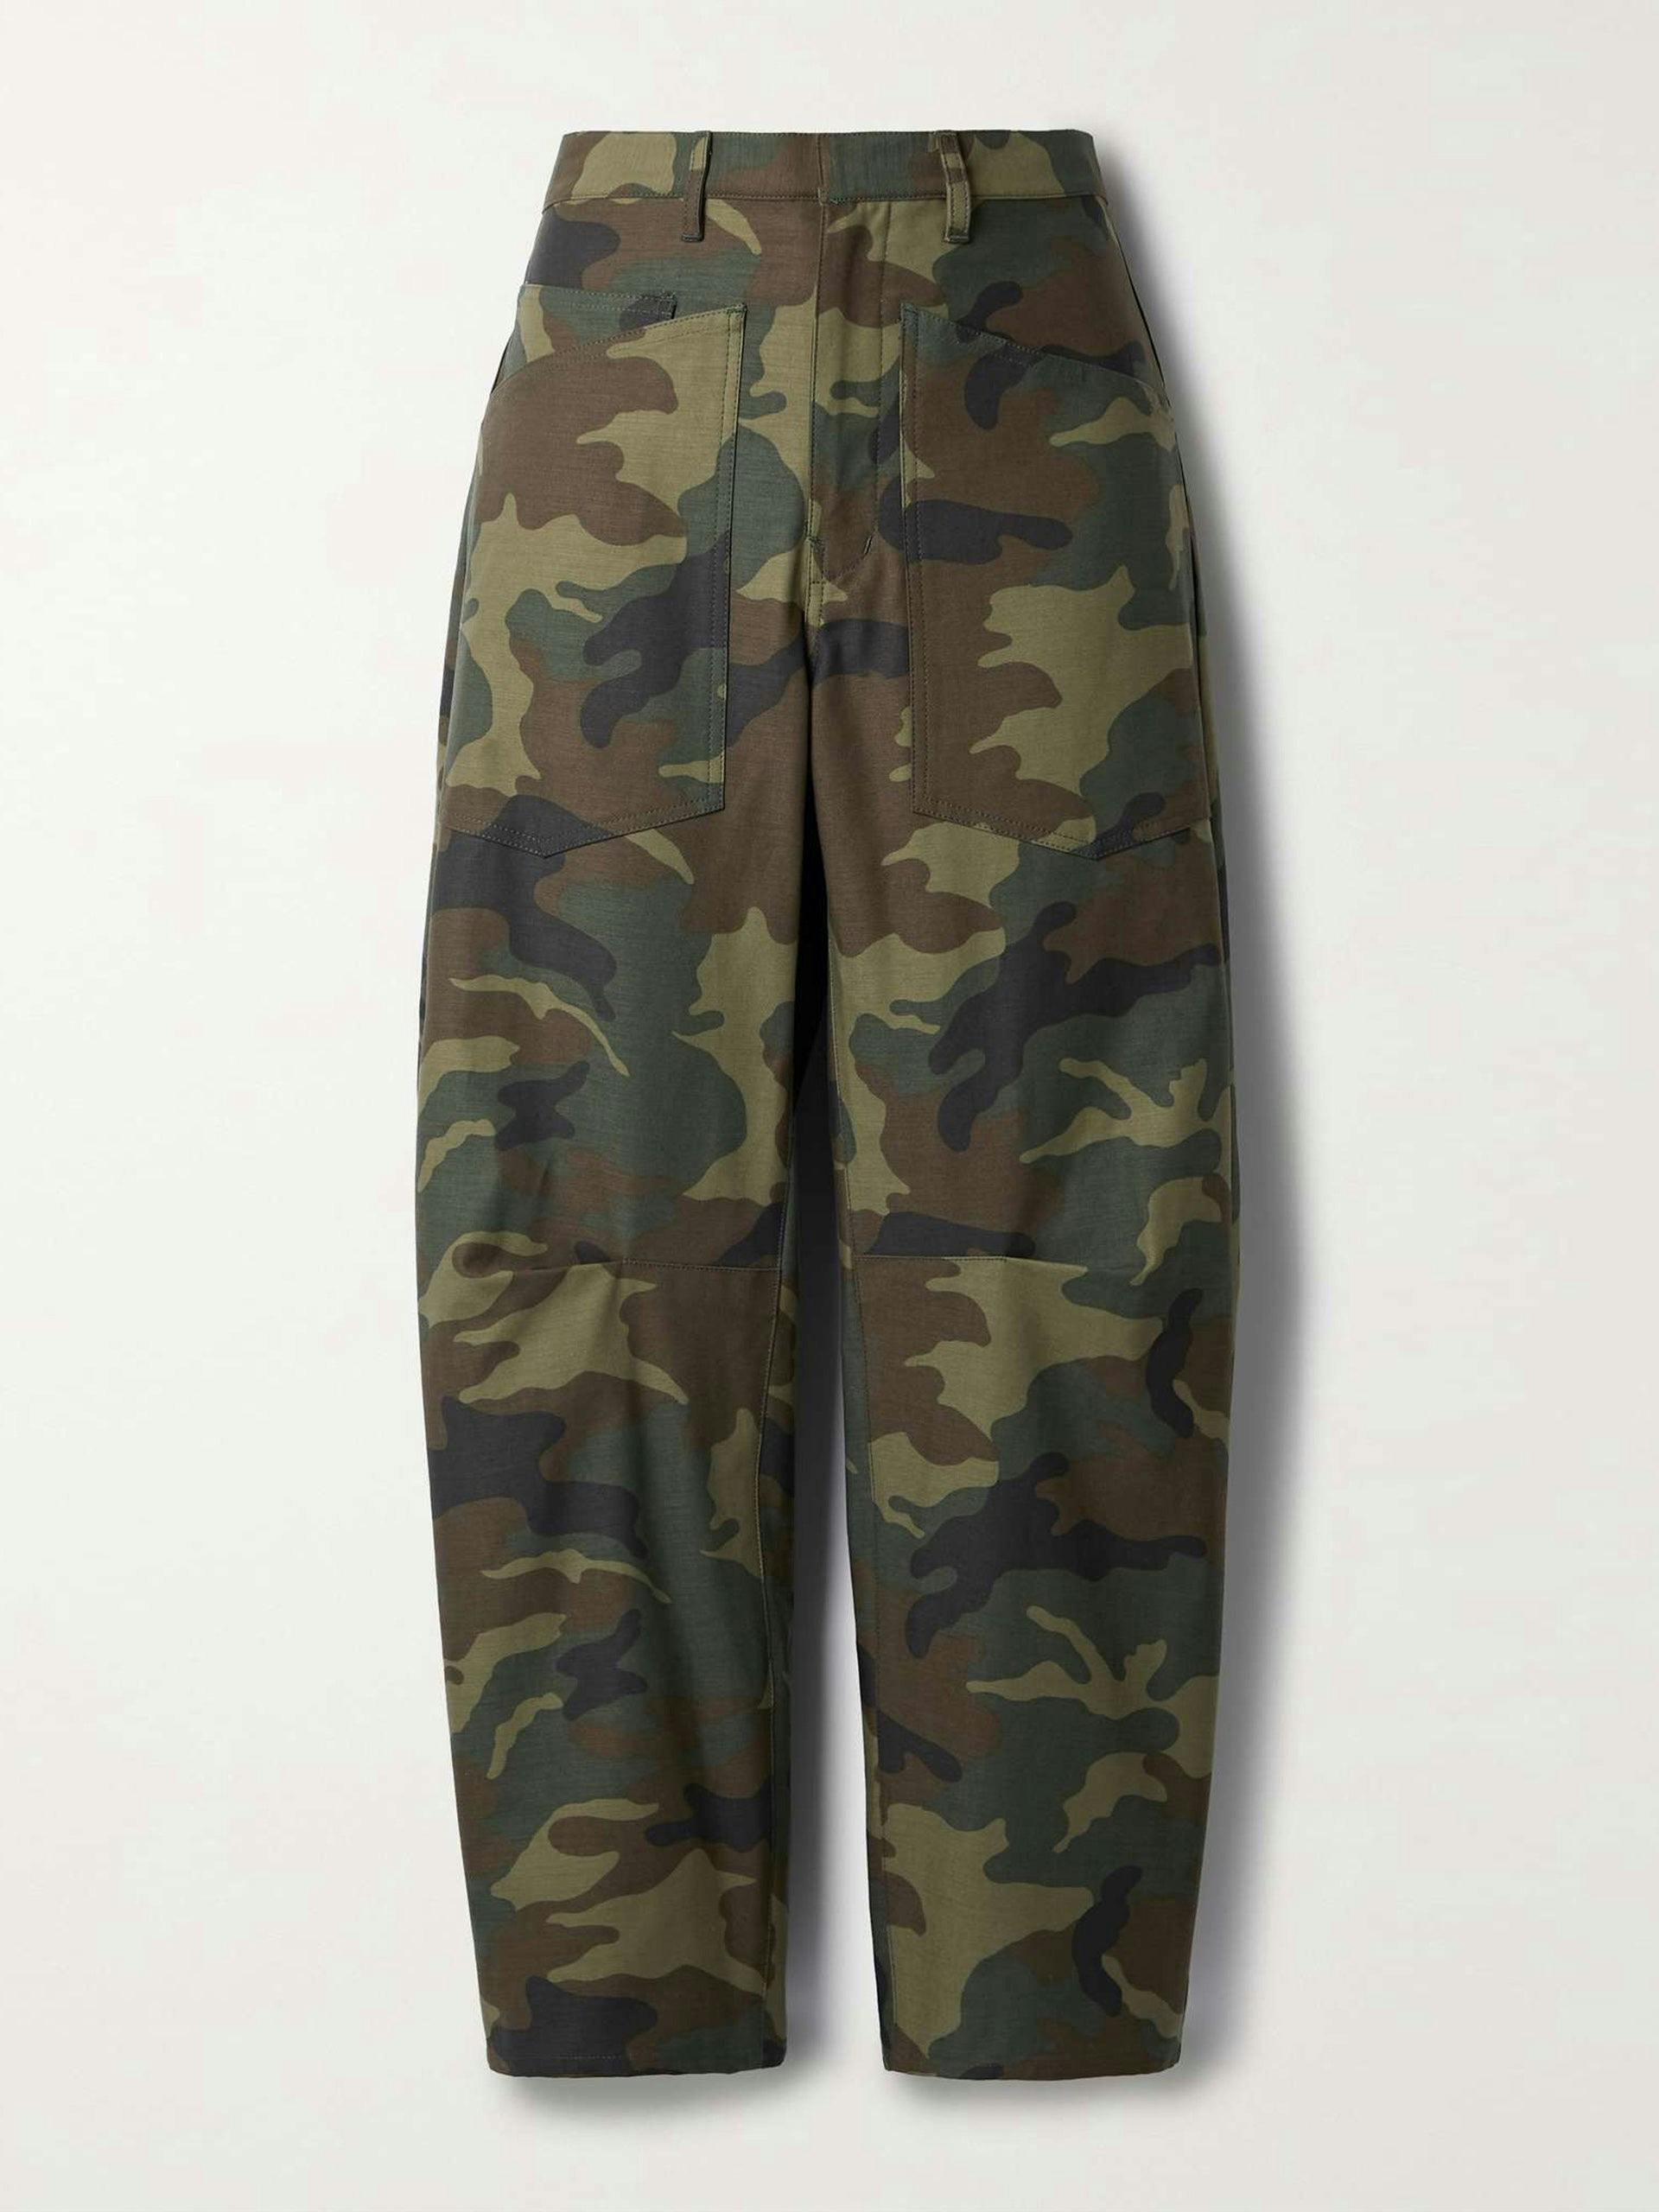 Camoflage canvas trousers